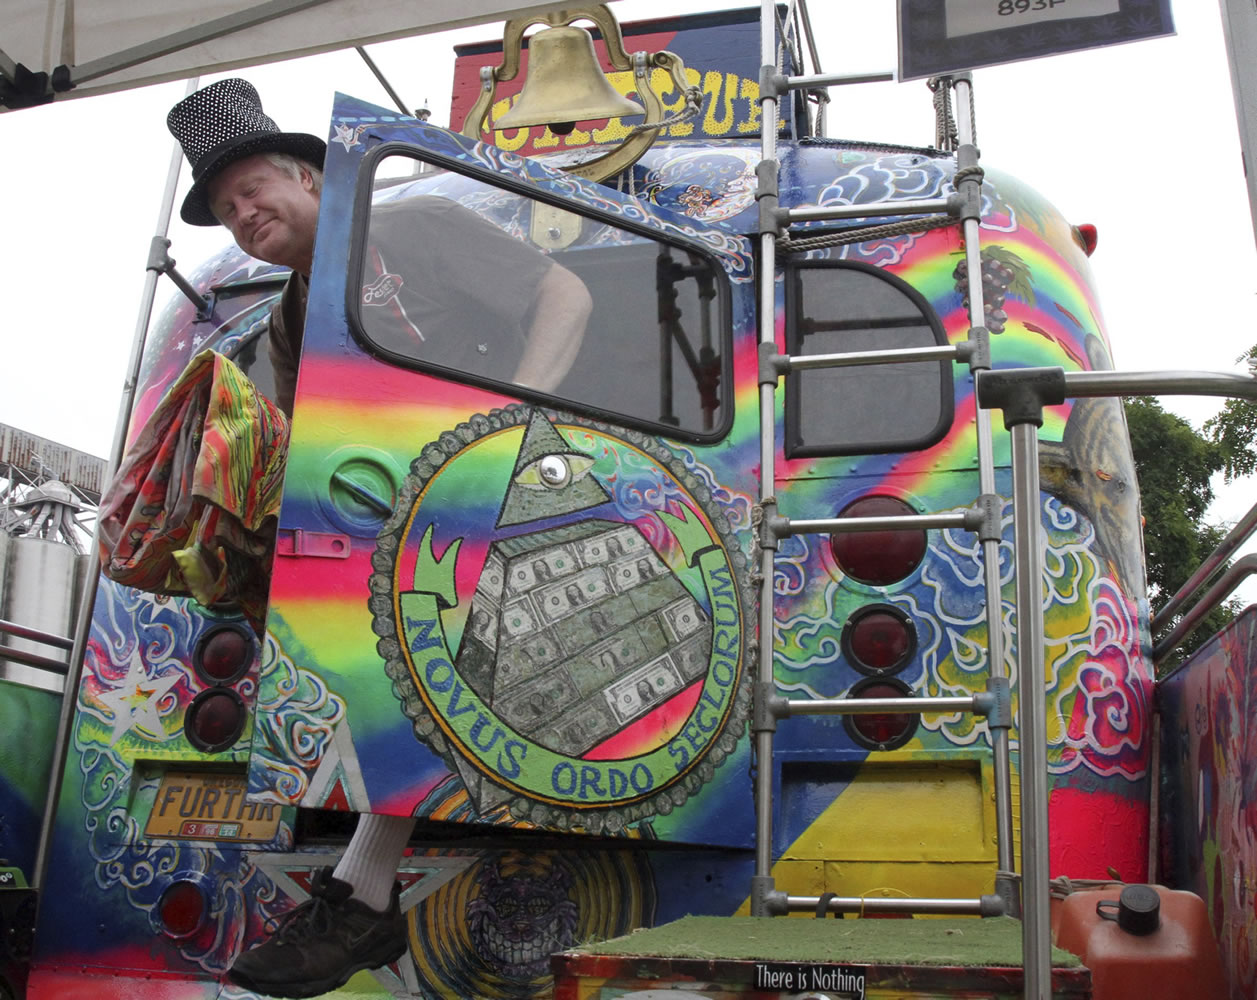 Zane Kesey of Eugene, Ore., emerges from the famous Merry Prankster bus that belonged to his late father, Ken Kesey, Saturday at Seattle's annual Hempfest.